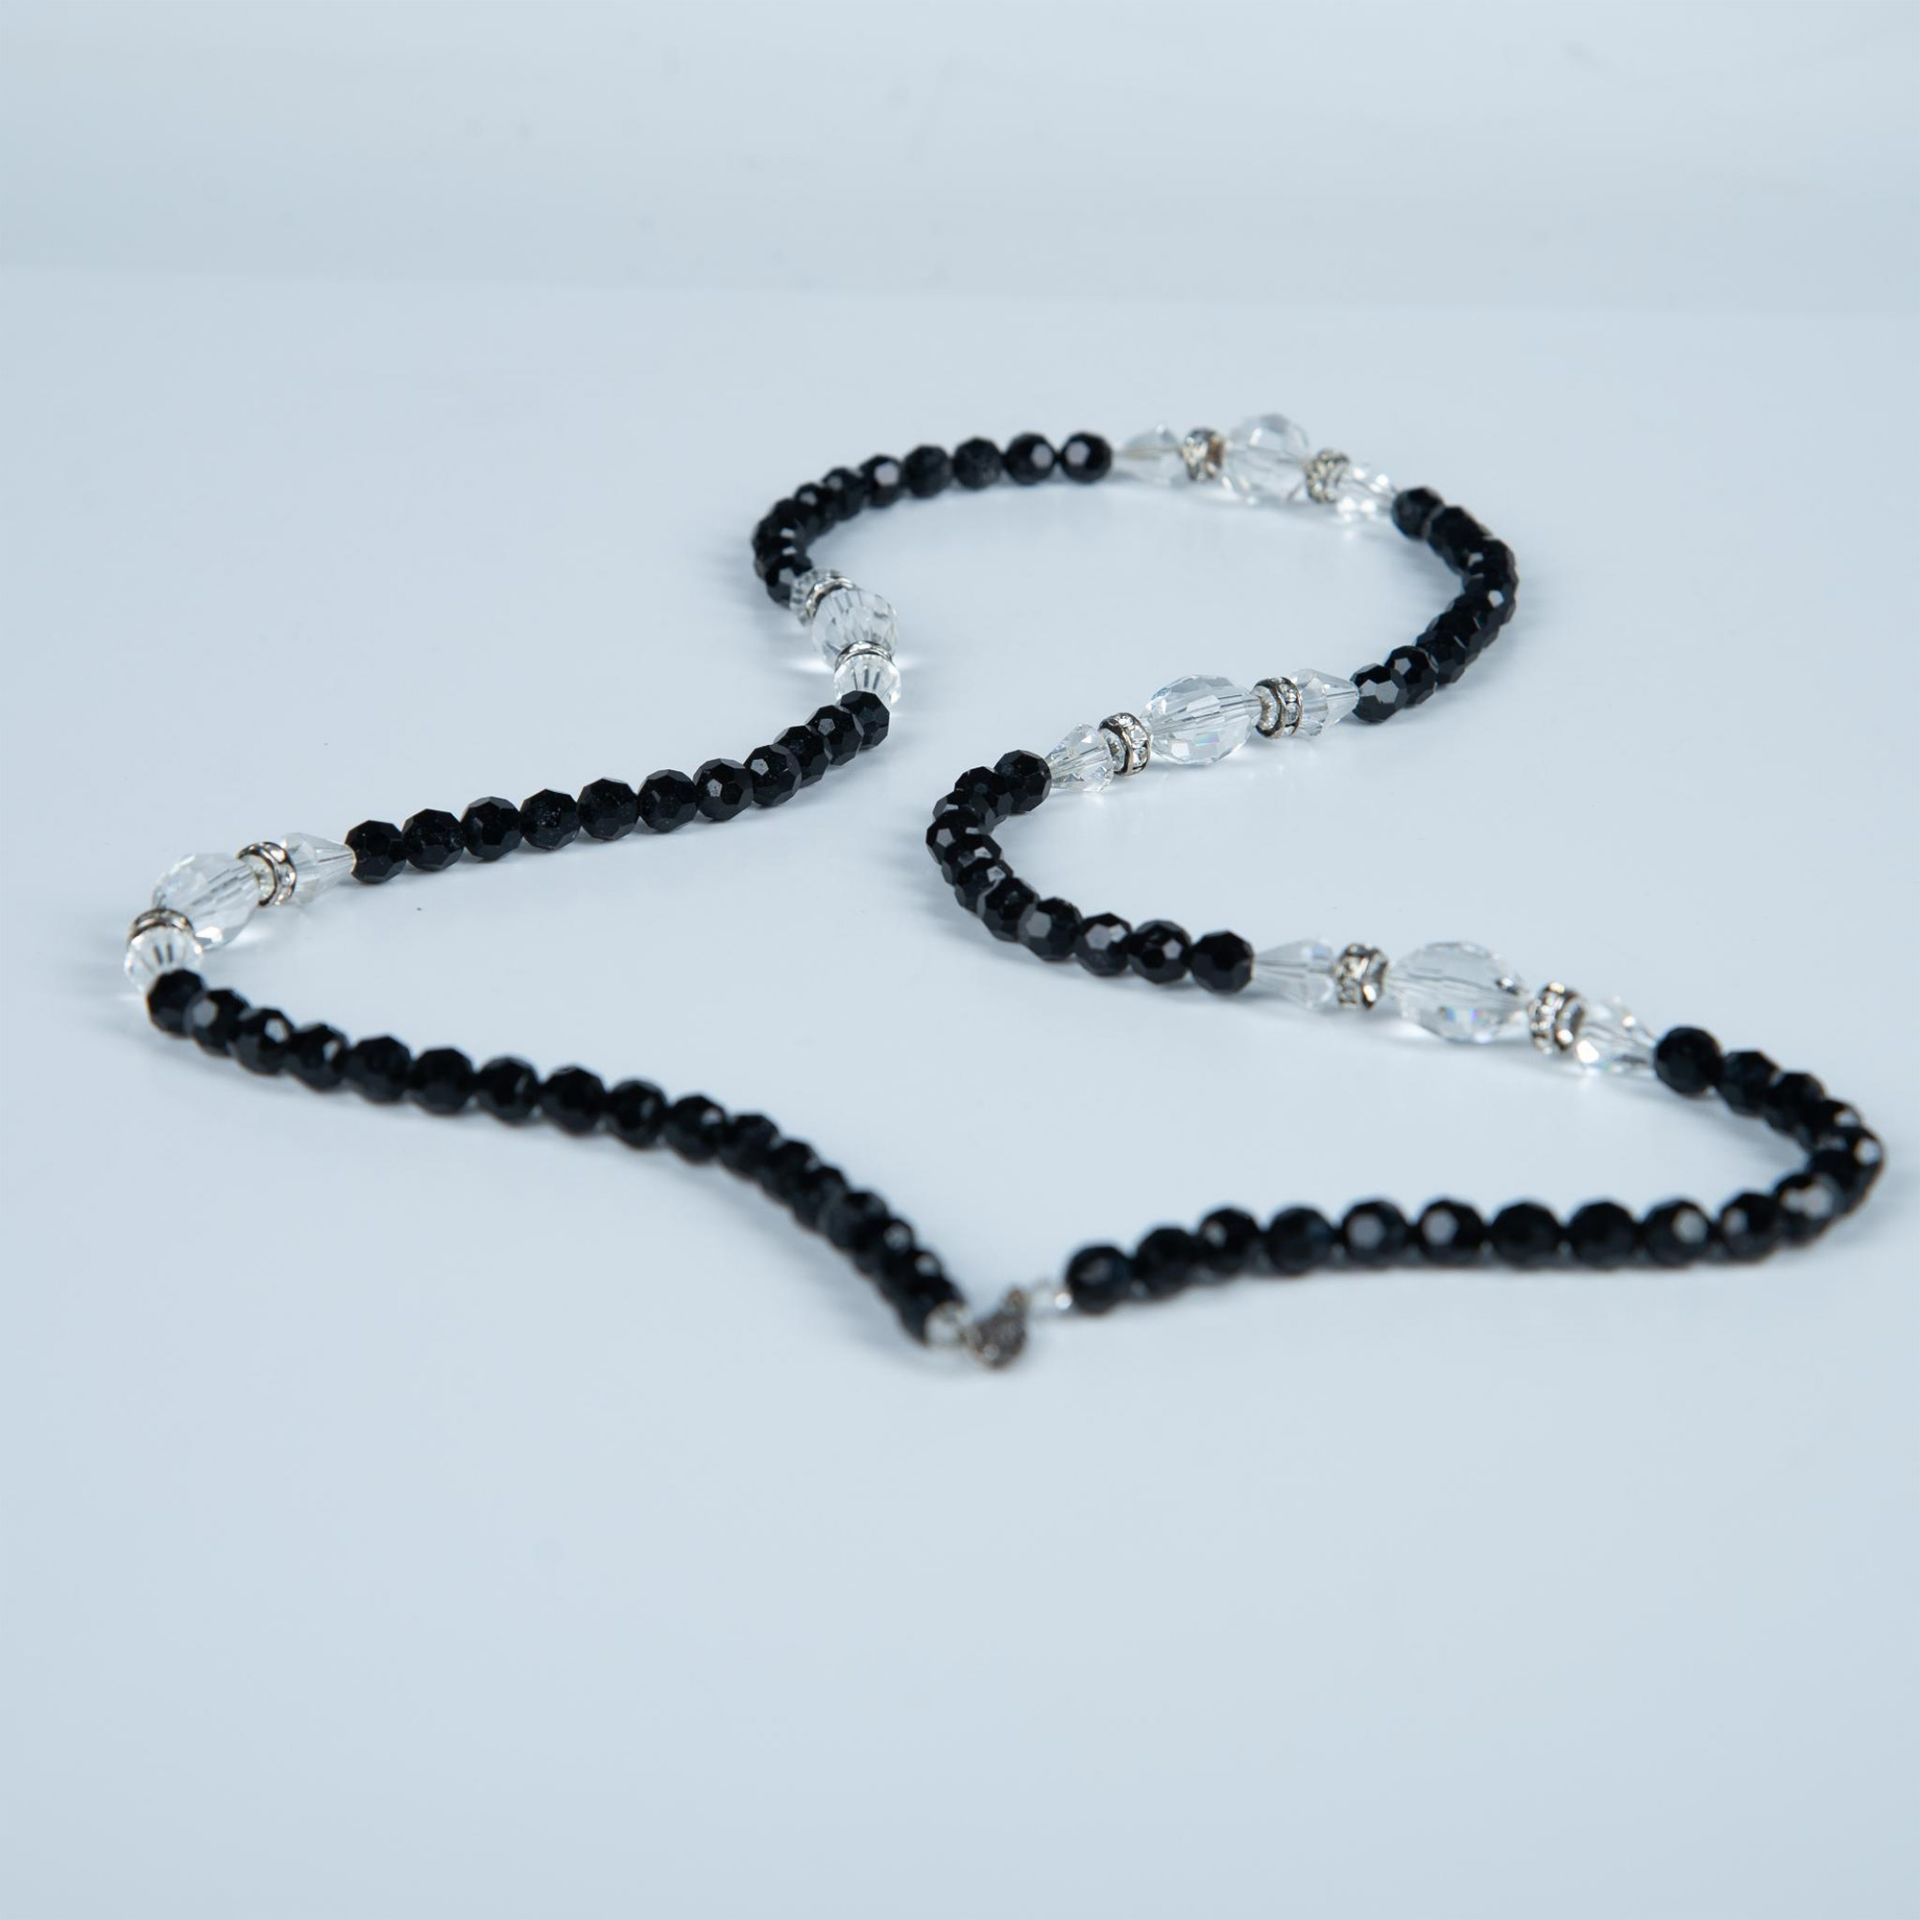 Classy Long Black and Clear Faceted Bead Necklace - Image 3 of 3